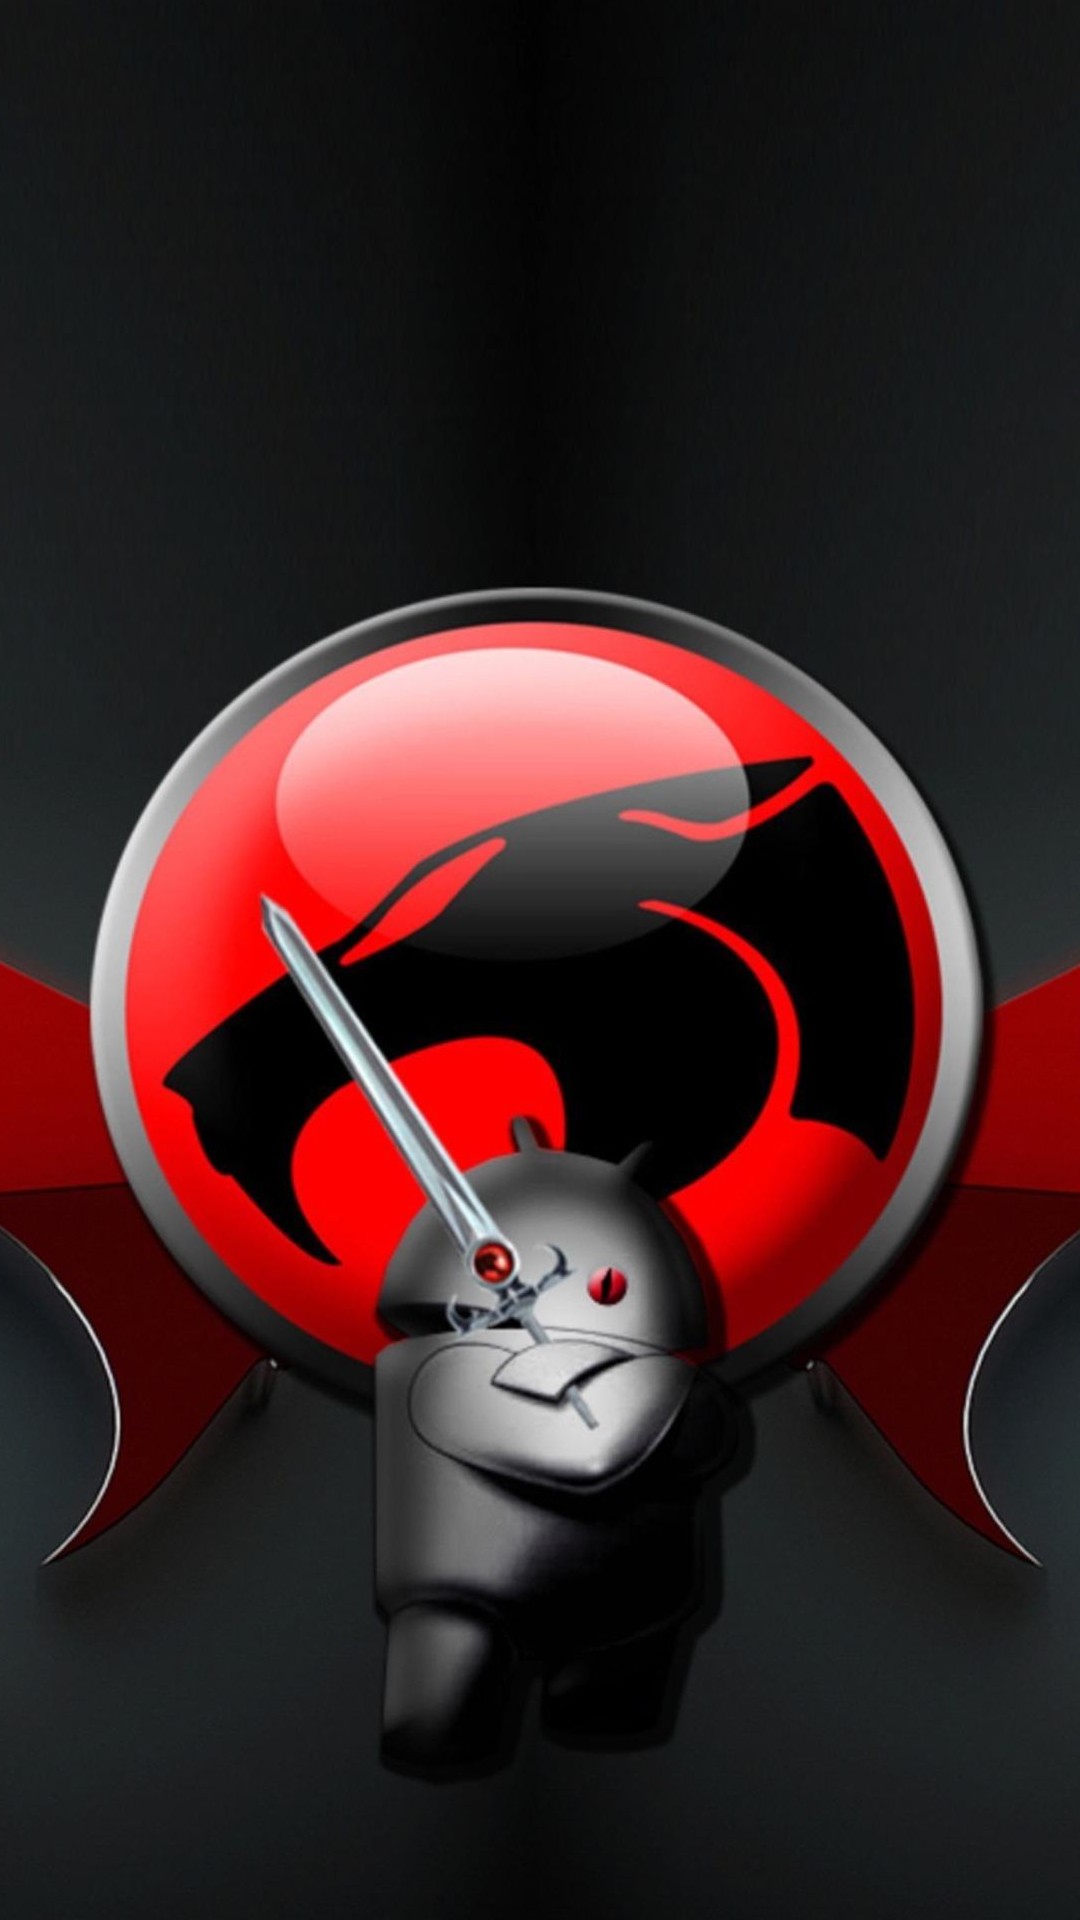 Android Sword Smartphone Wallpapers Hd Android Hd Black Red 1080x1920 Wallpaper Teahub Io